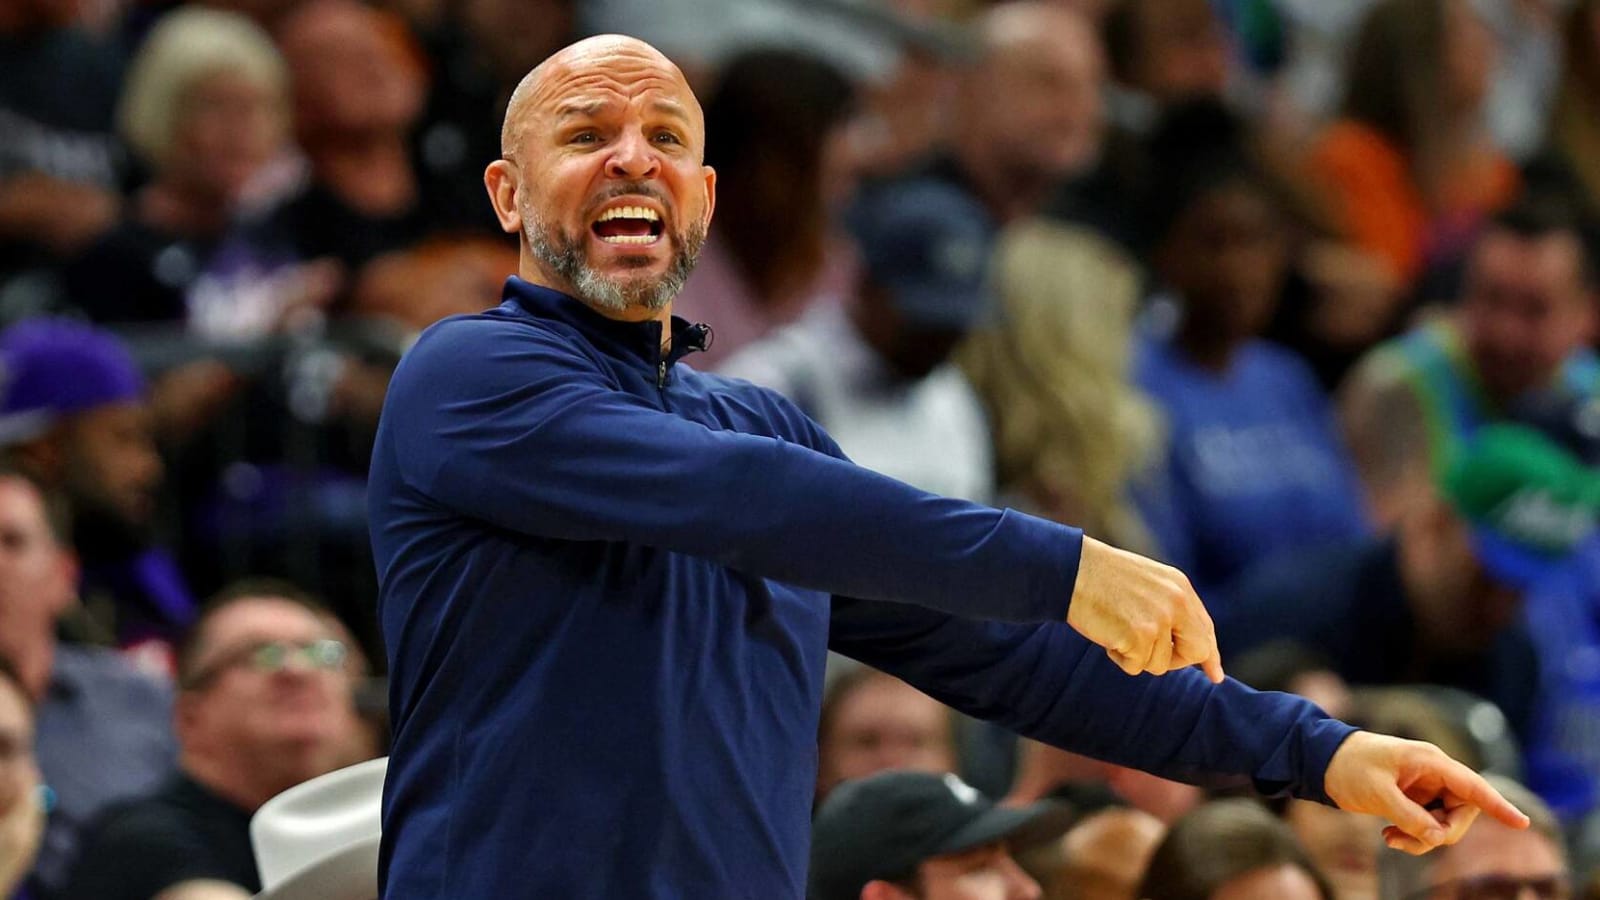 Kidd has telling comment on Mavs’ chance to overcome deficit